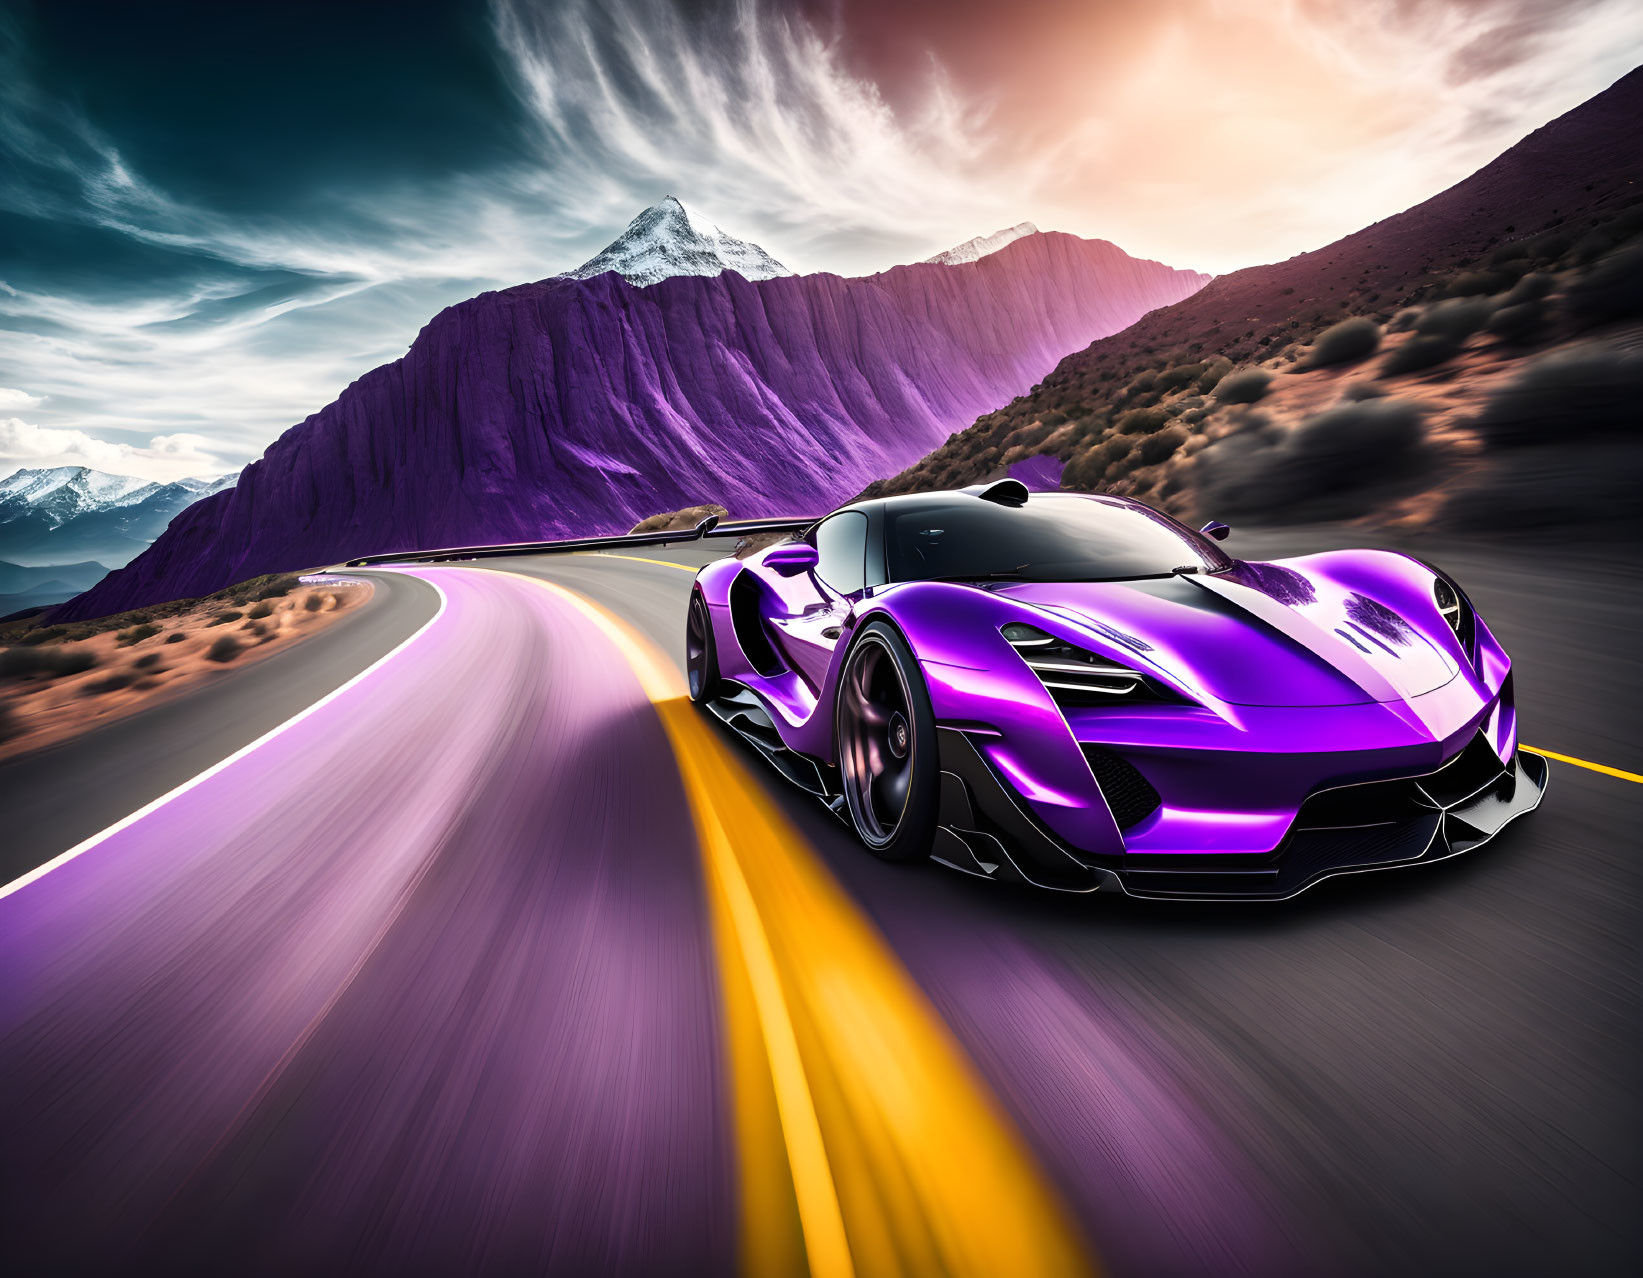 Purple sports car races on mountain road under dramatic sky